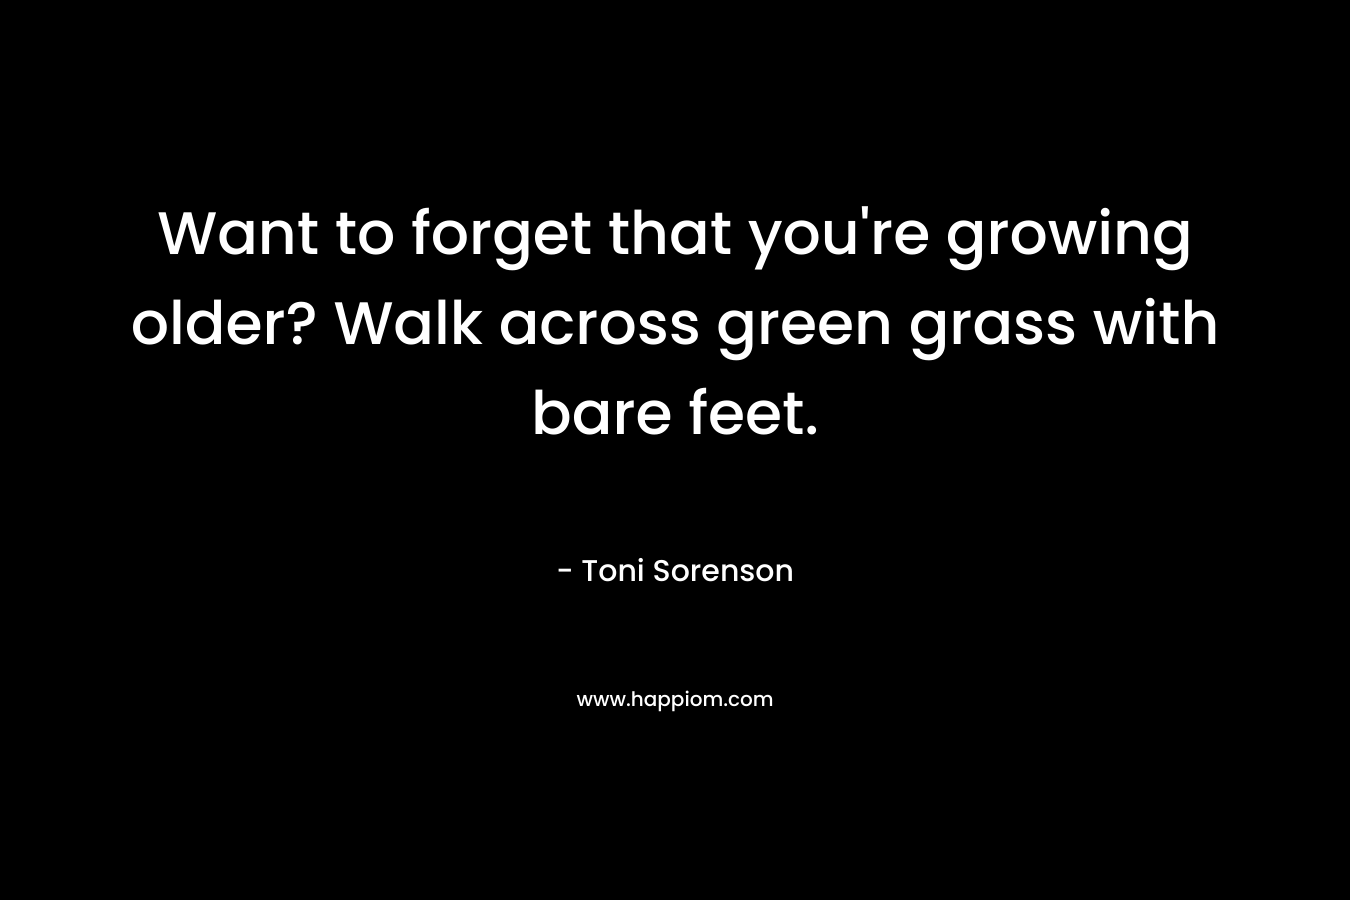 Want to forget that you're growing older? Walk across green grass with bare feet.